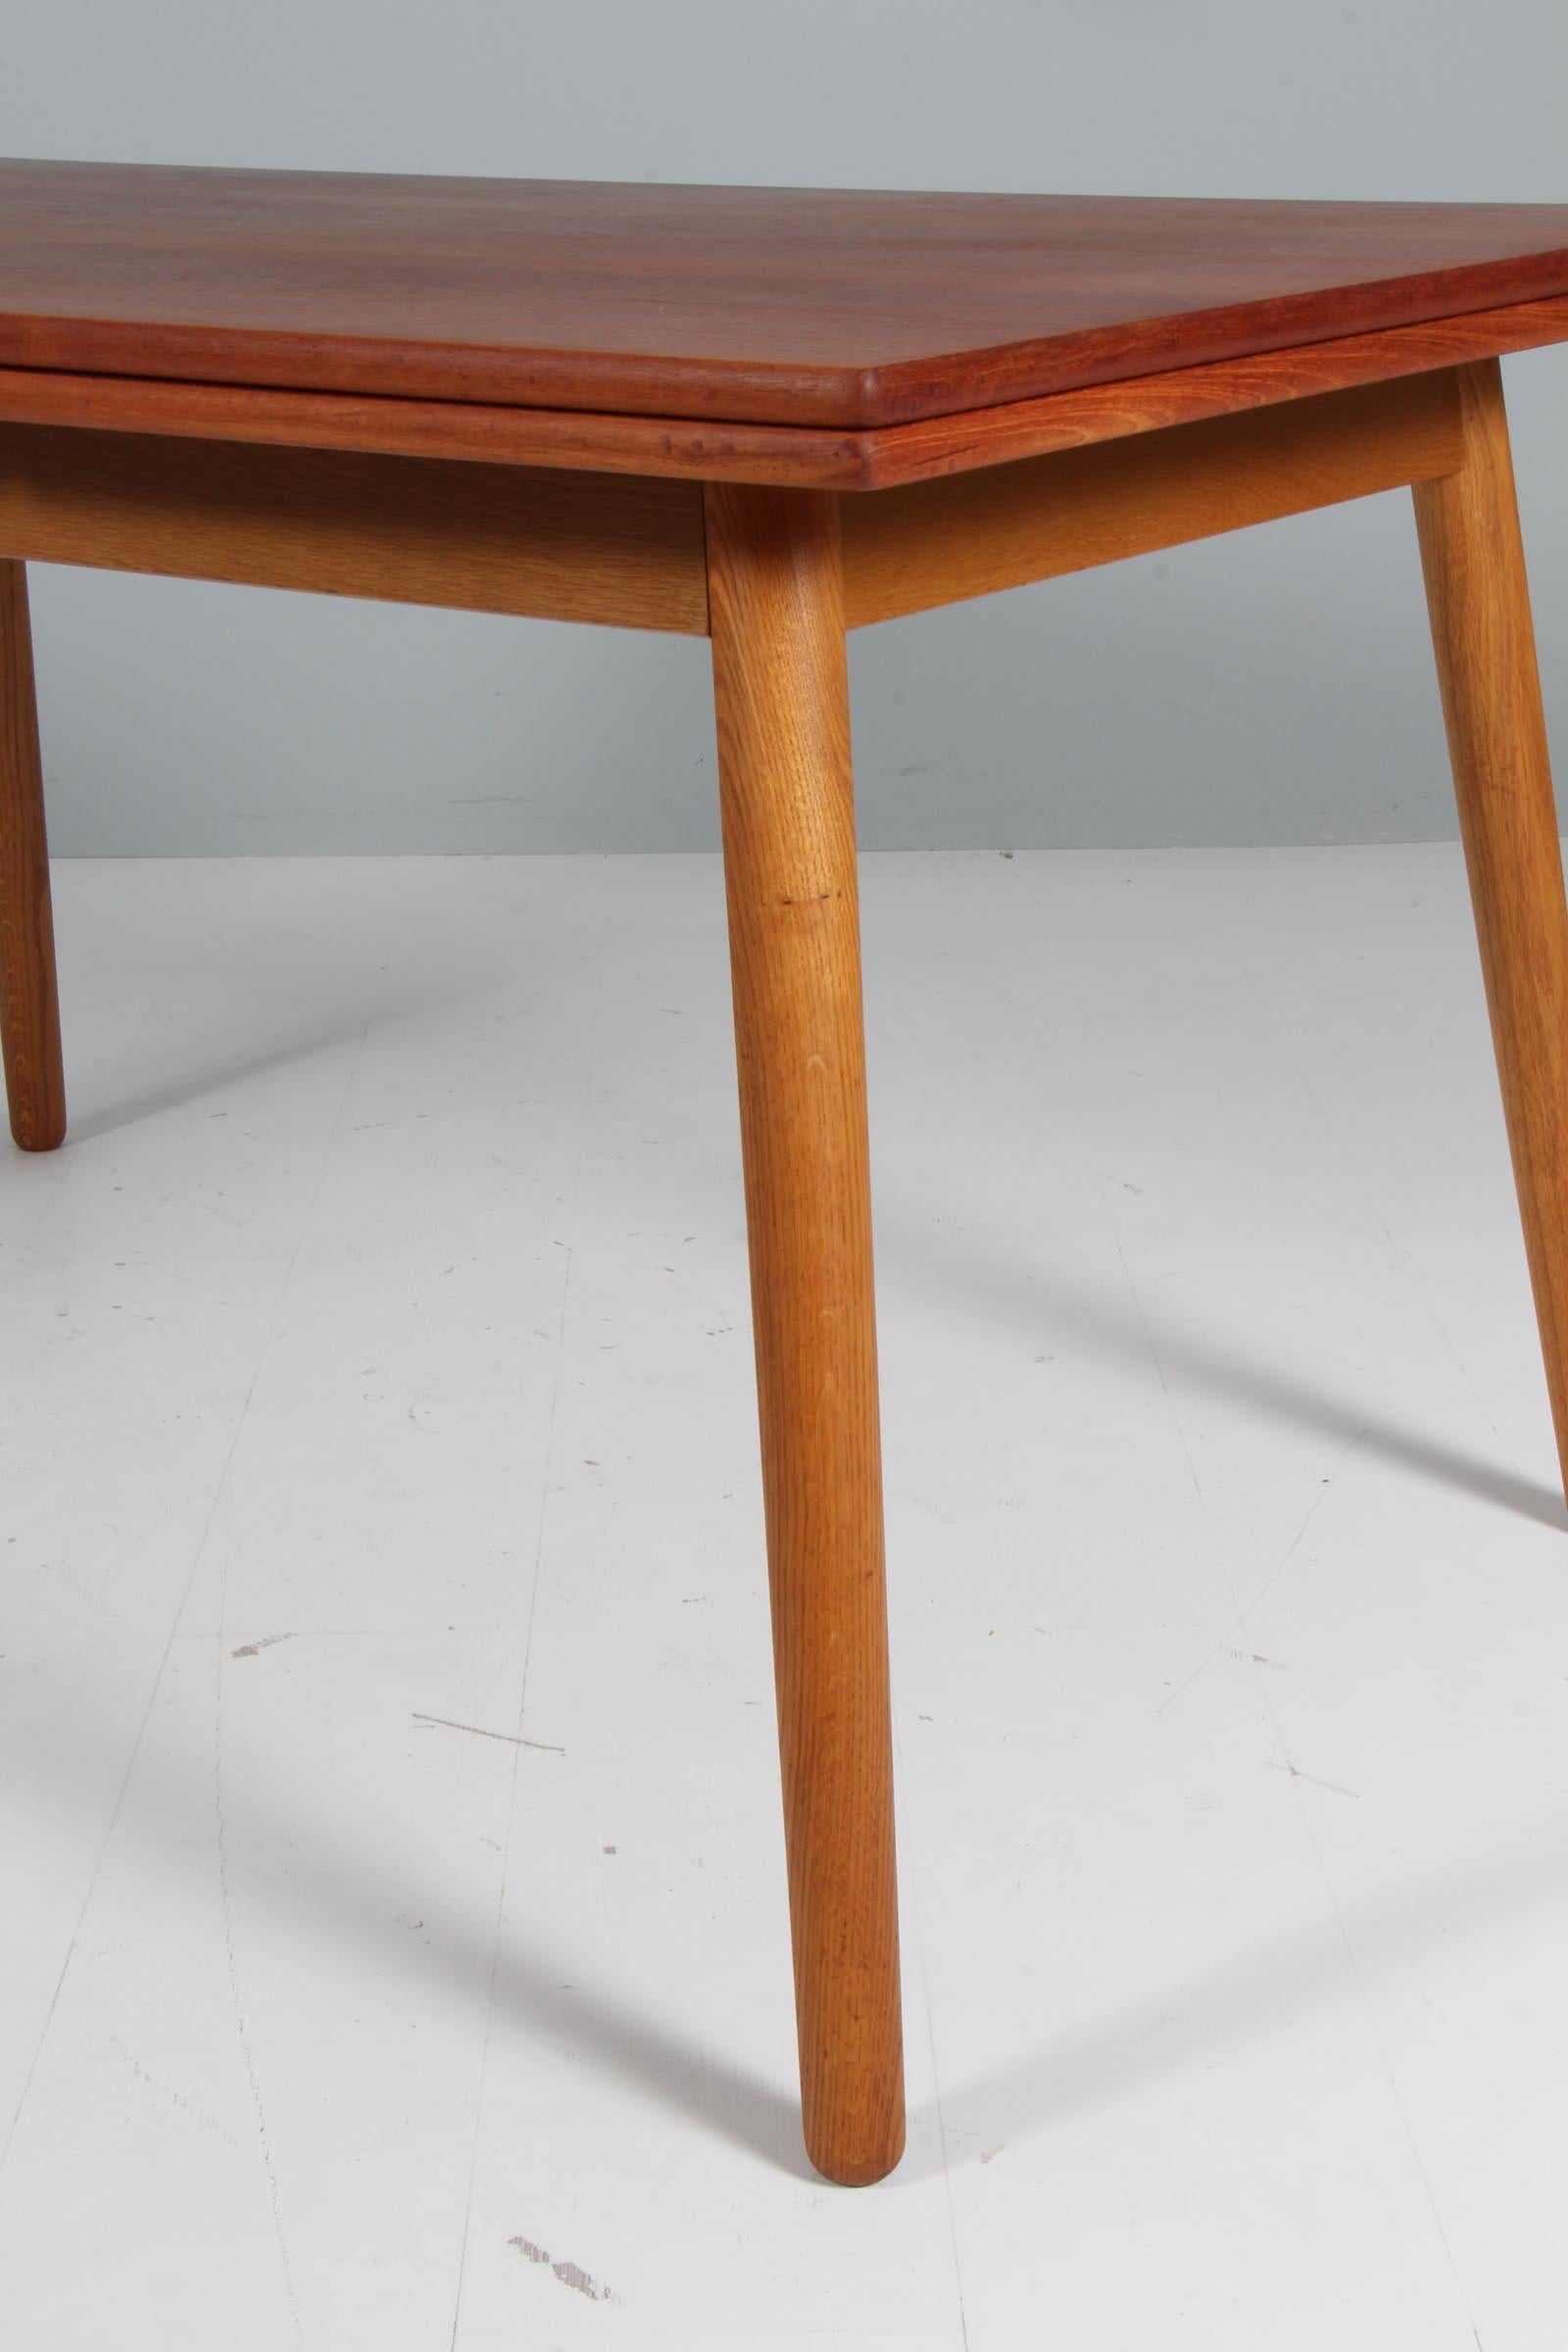 Danish Poul Volther for FDB dining table in teak and oak, extension leafes.